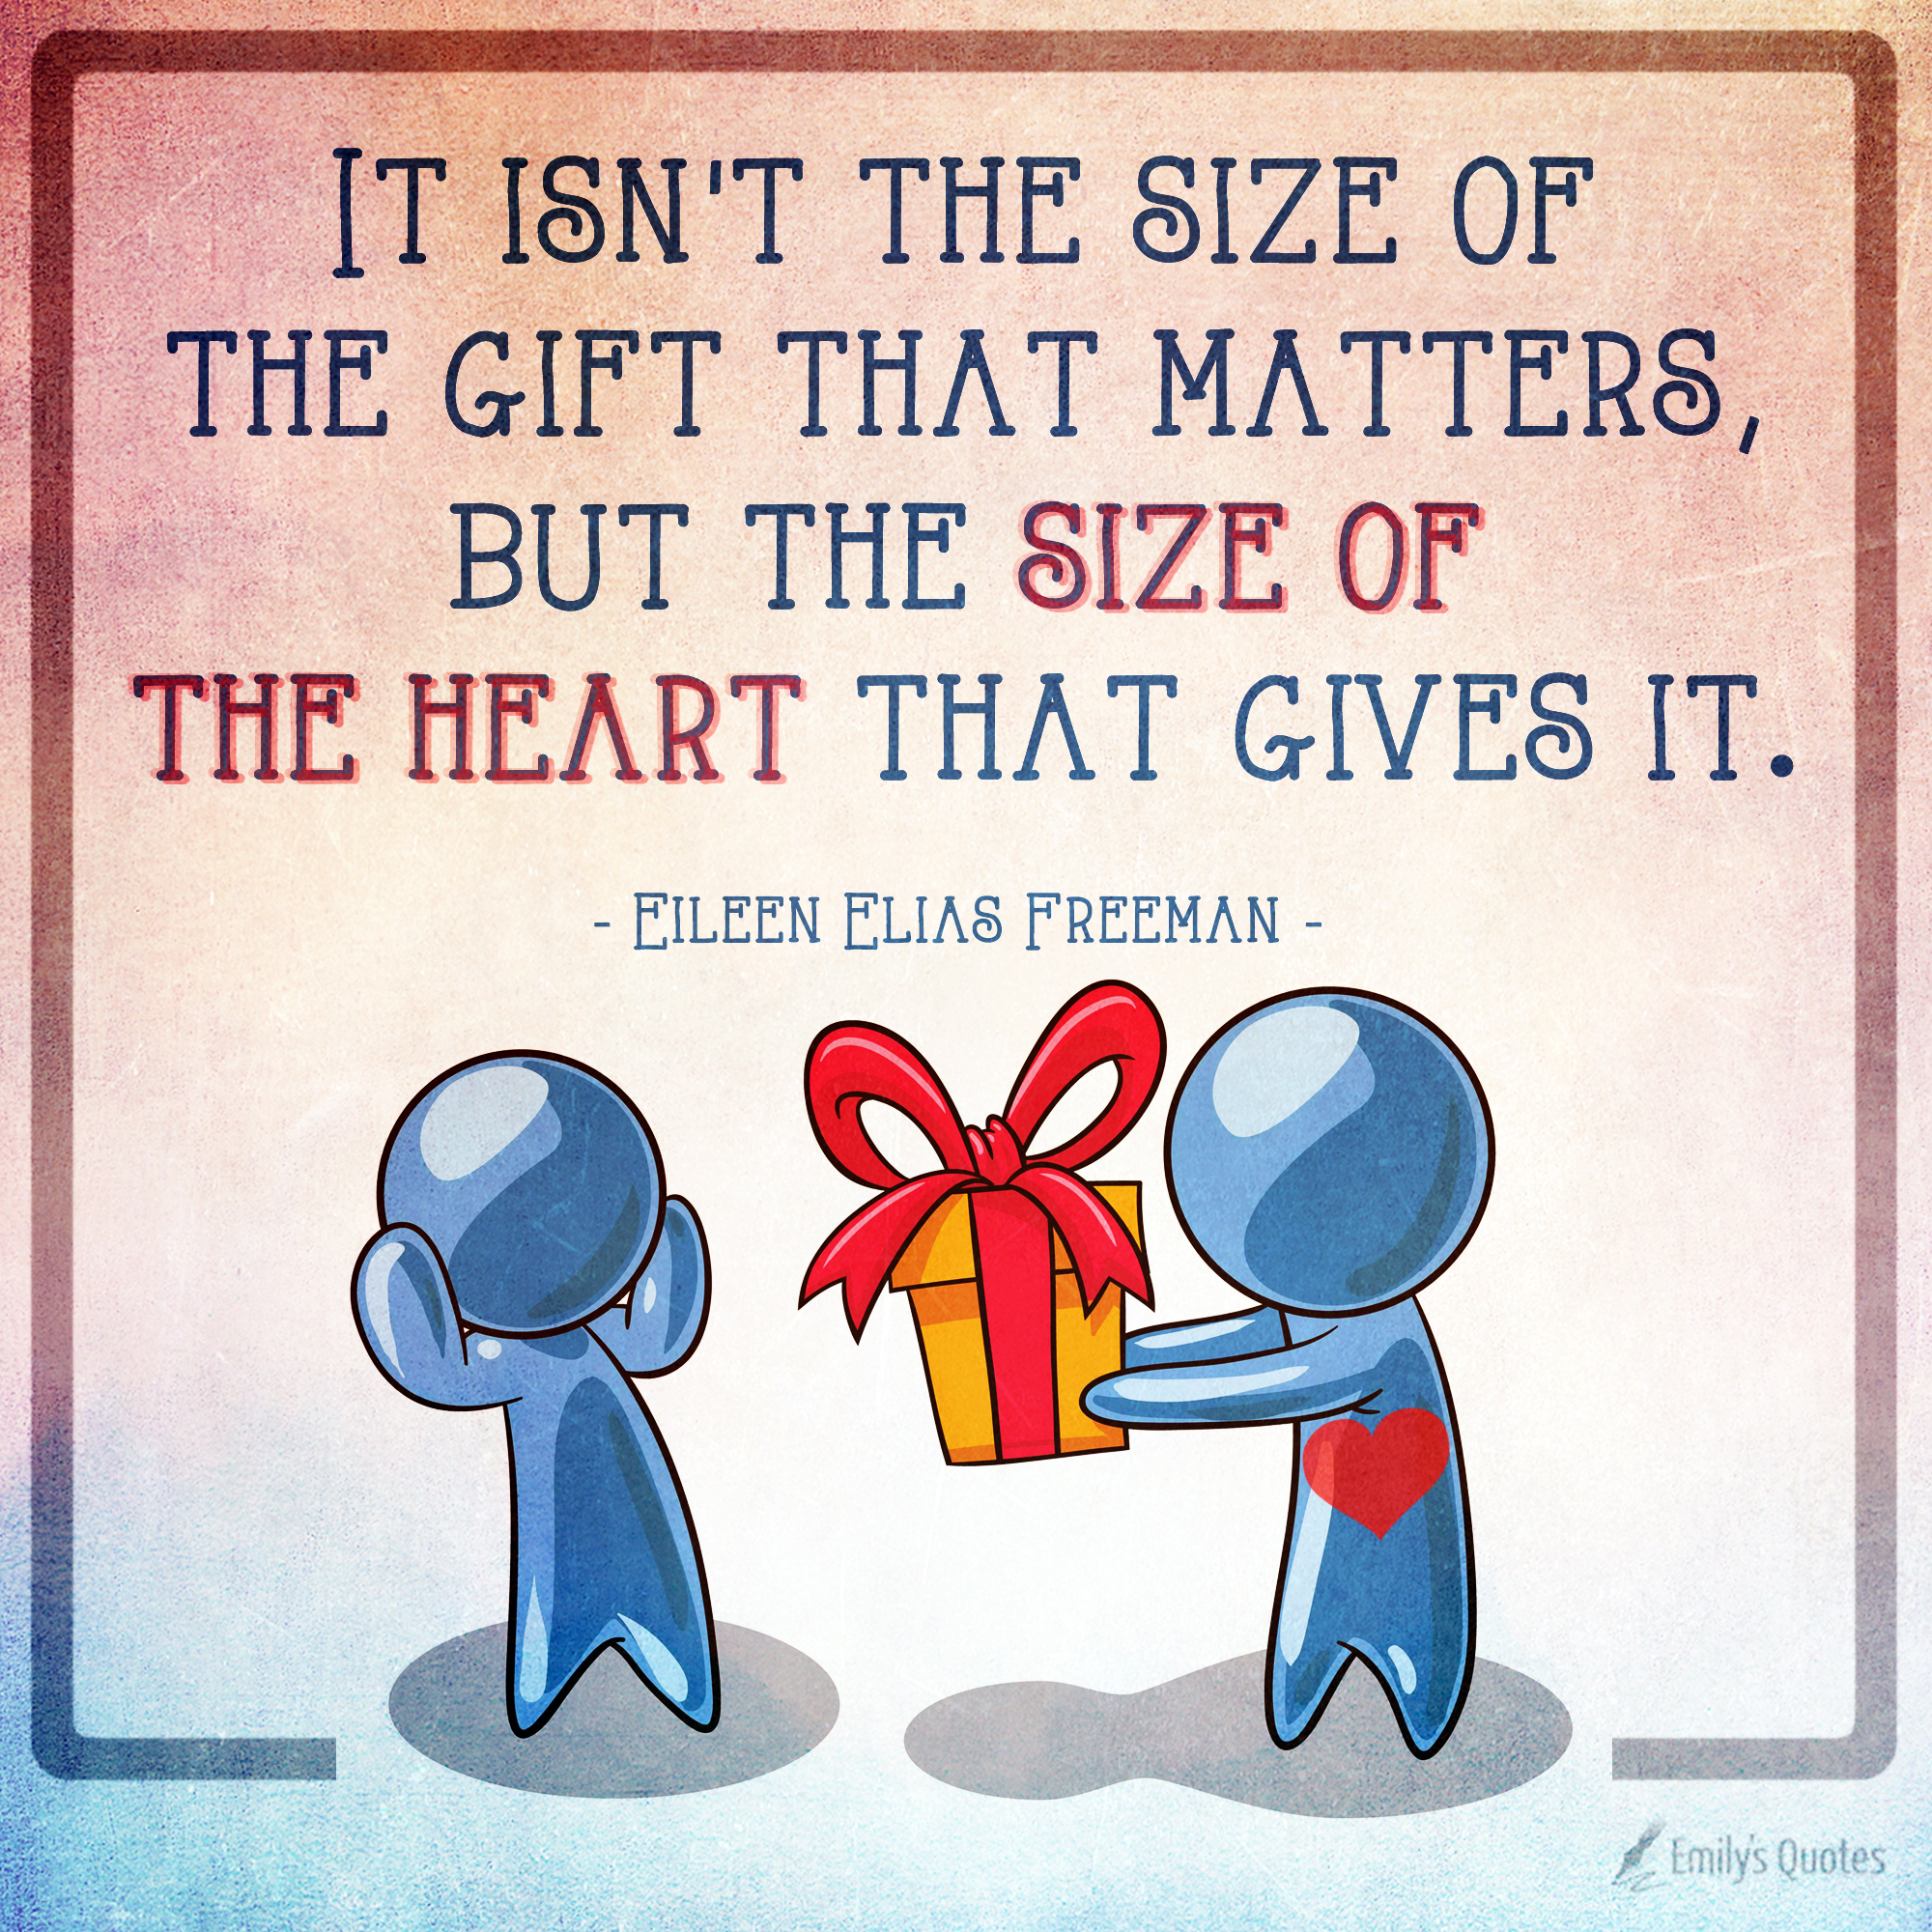 It isn’t the size of the gift that matters, but the size of the heart that gives it